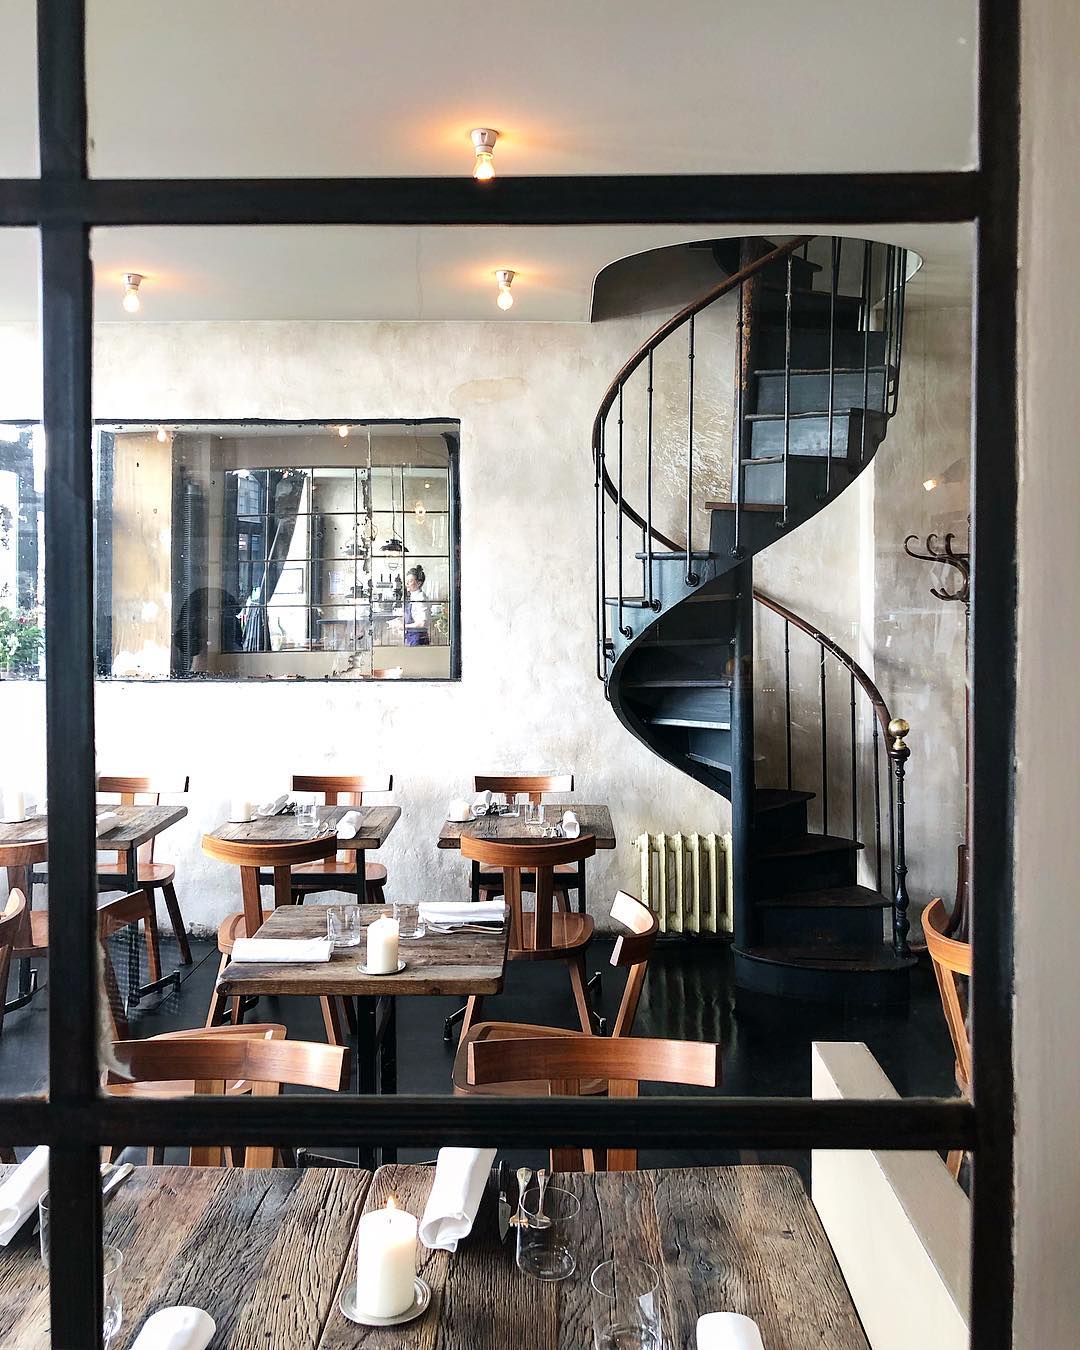 The Scandinavian style interiors of Septime with rustic wooden tables, simple wooden chairs and a black spiral staircase 